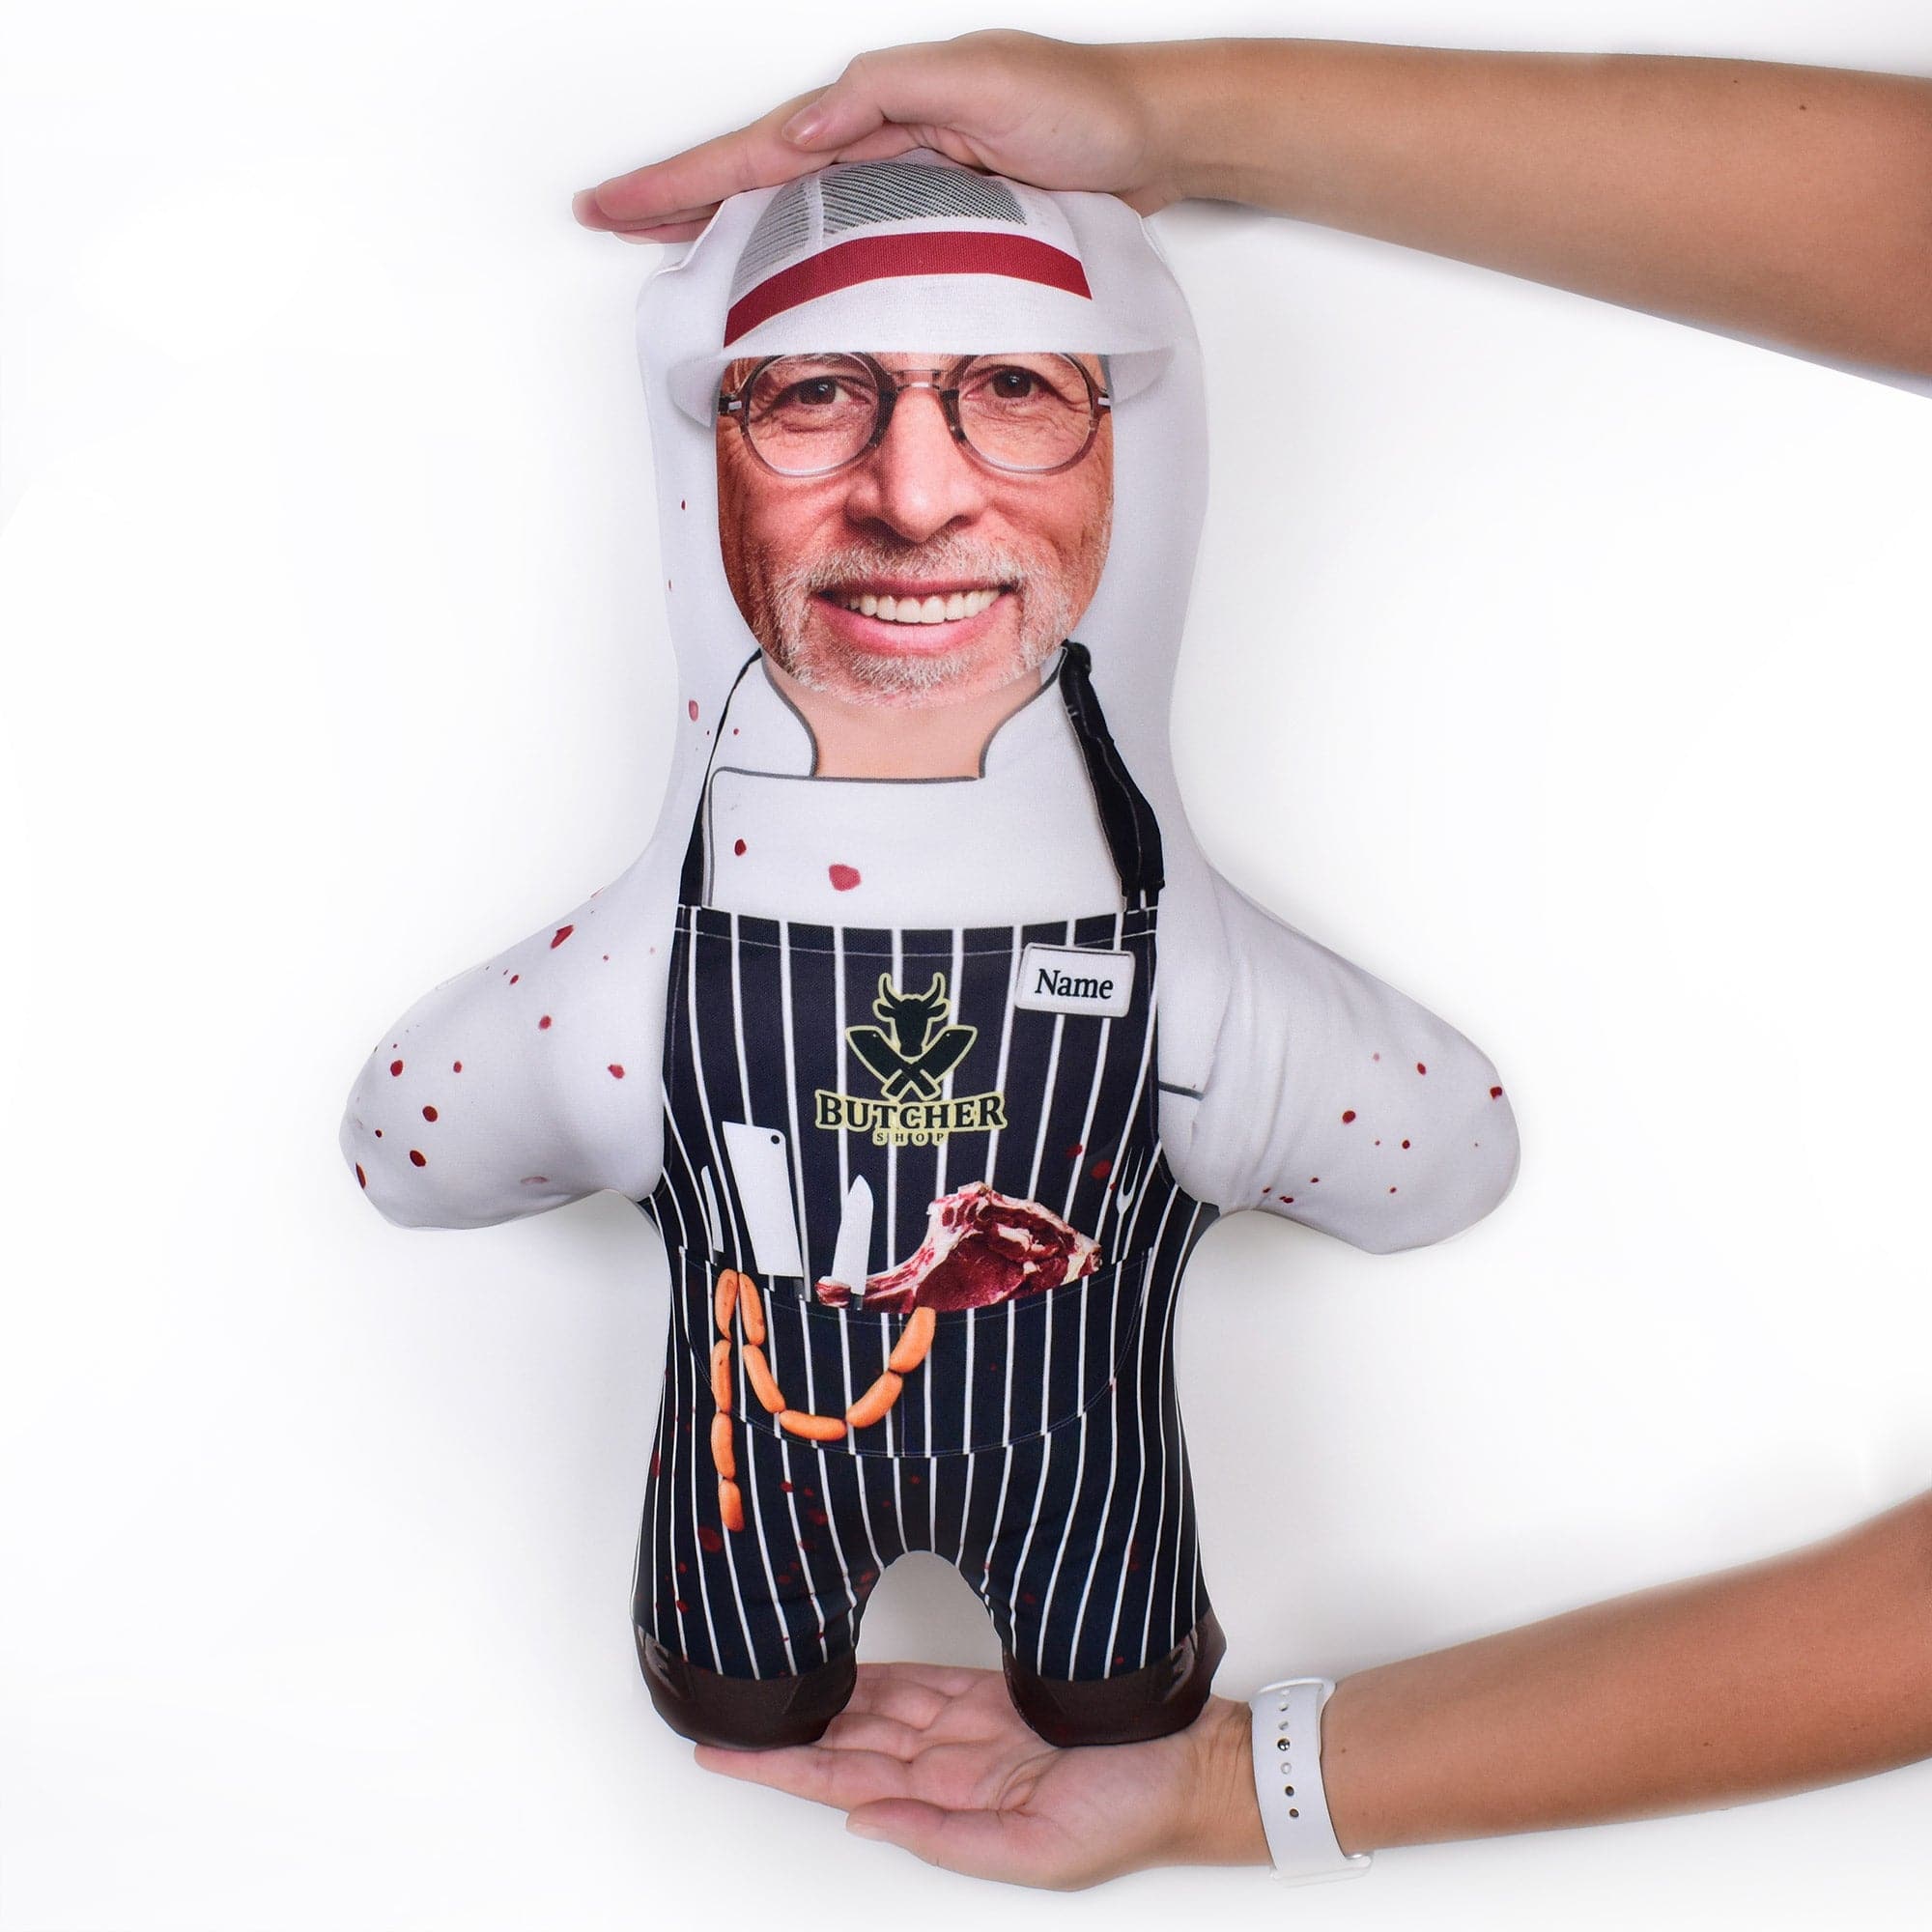 Butcher - 2 Styles - Personalised Mini Me Doll